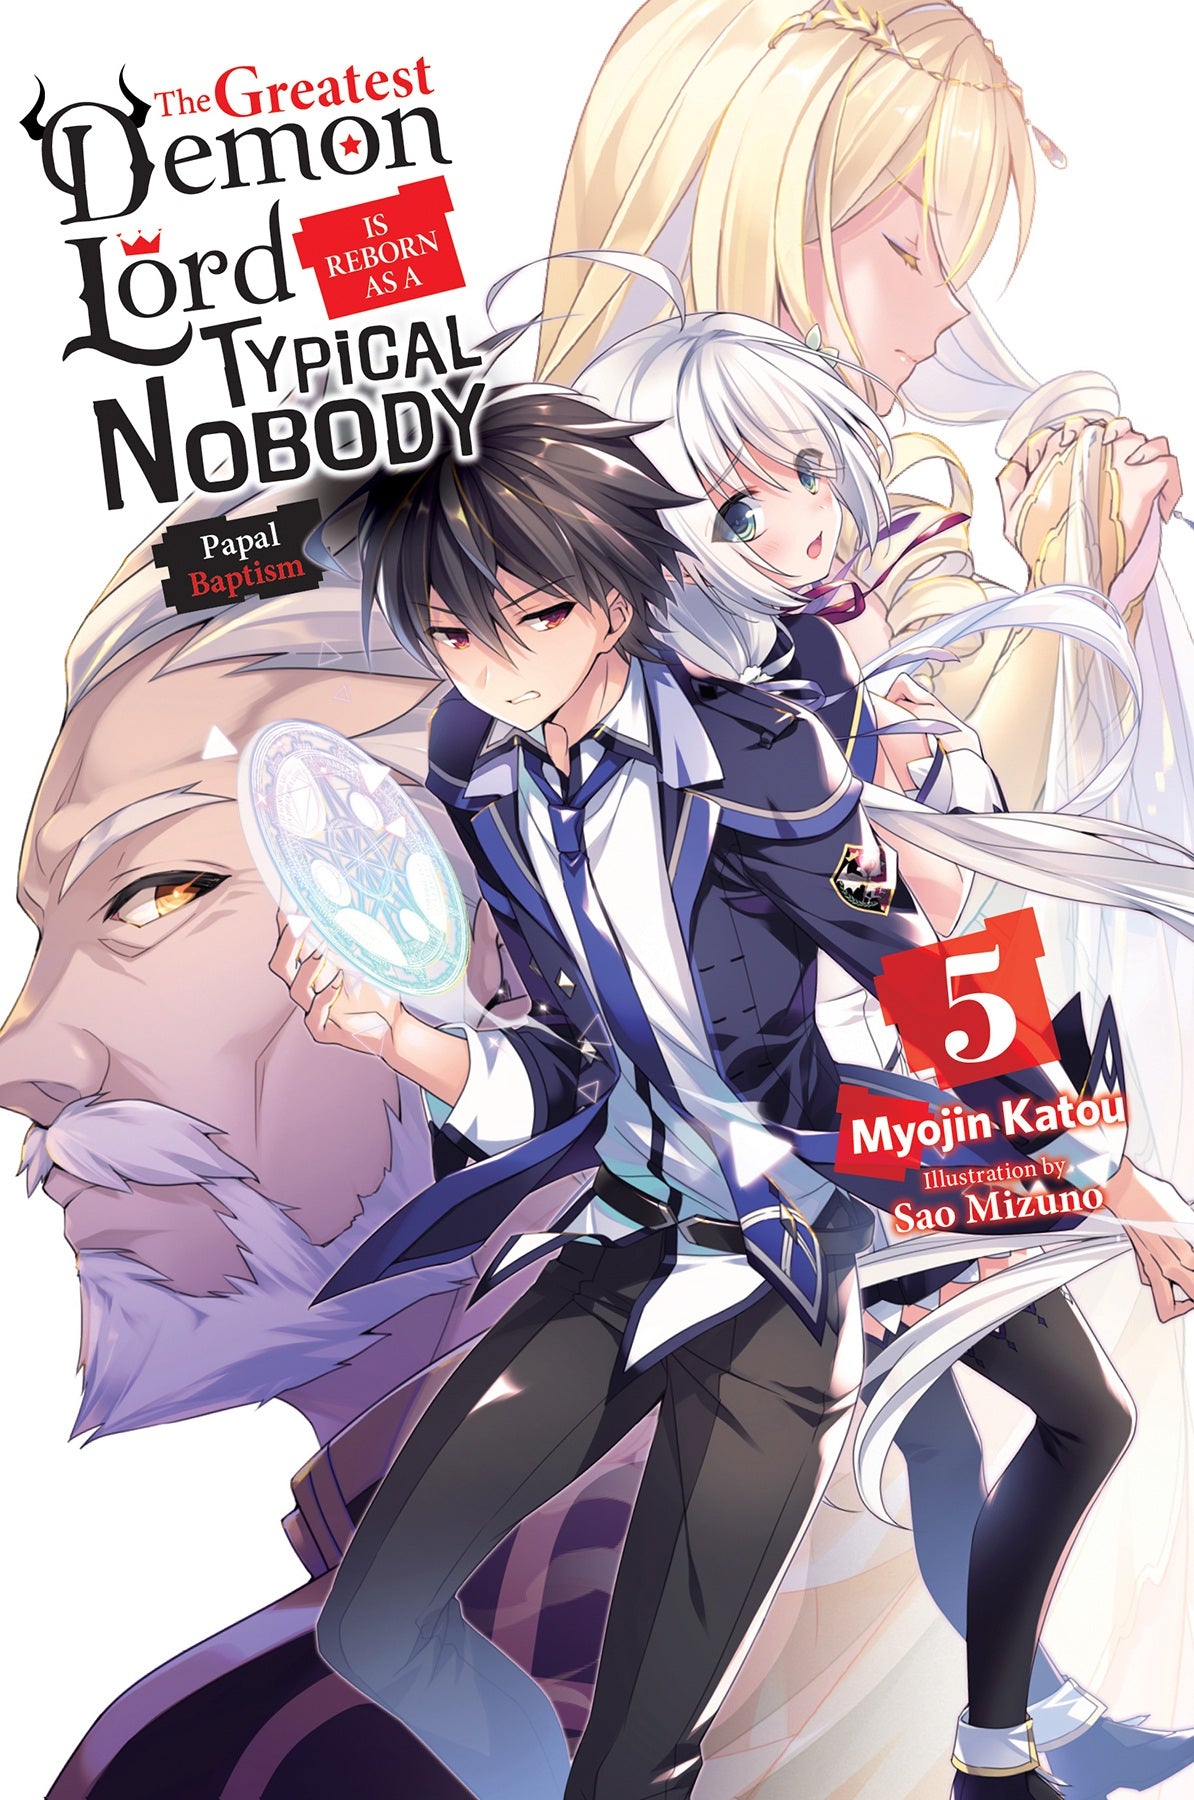 The Greatest Demon Lord Is Reborn as a Typical Nobody Vol. 05 (Light Novel)